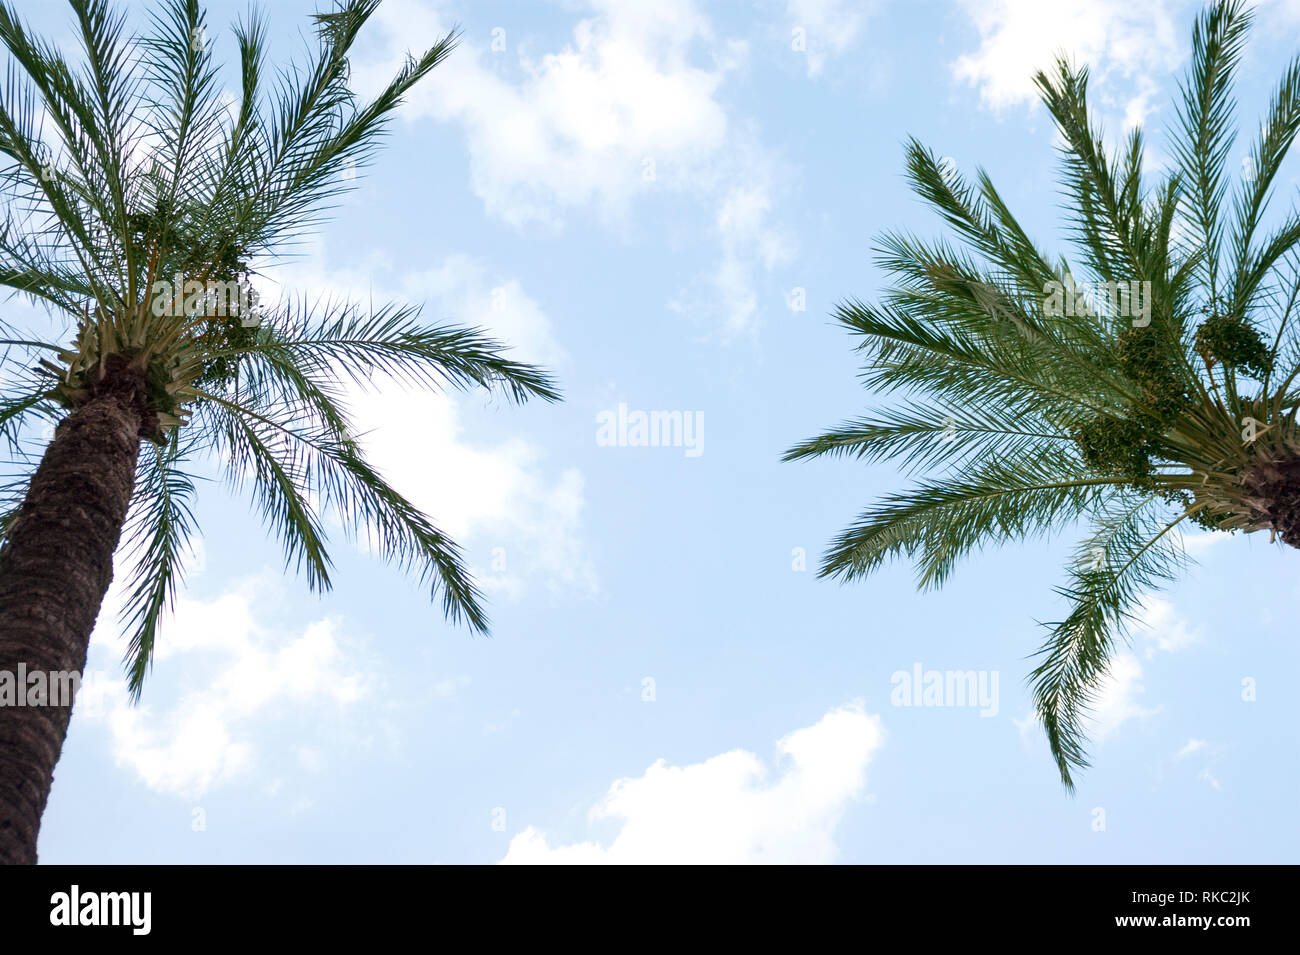 Two Palm trees on a blue and cloudy sky. Stock Photo